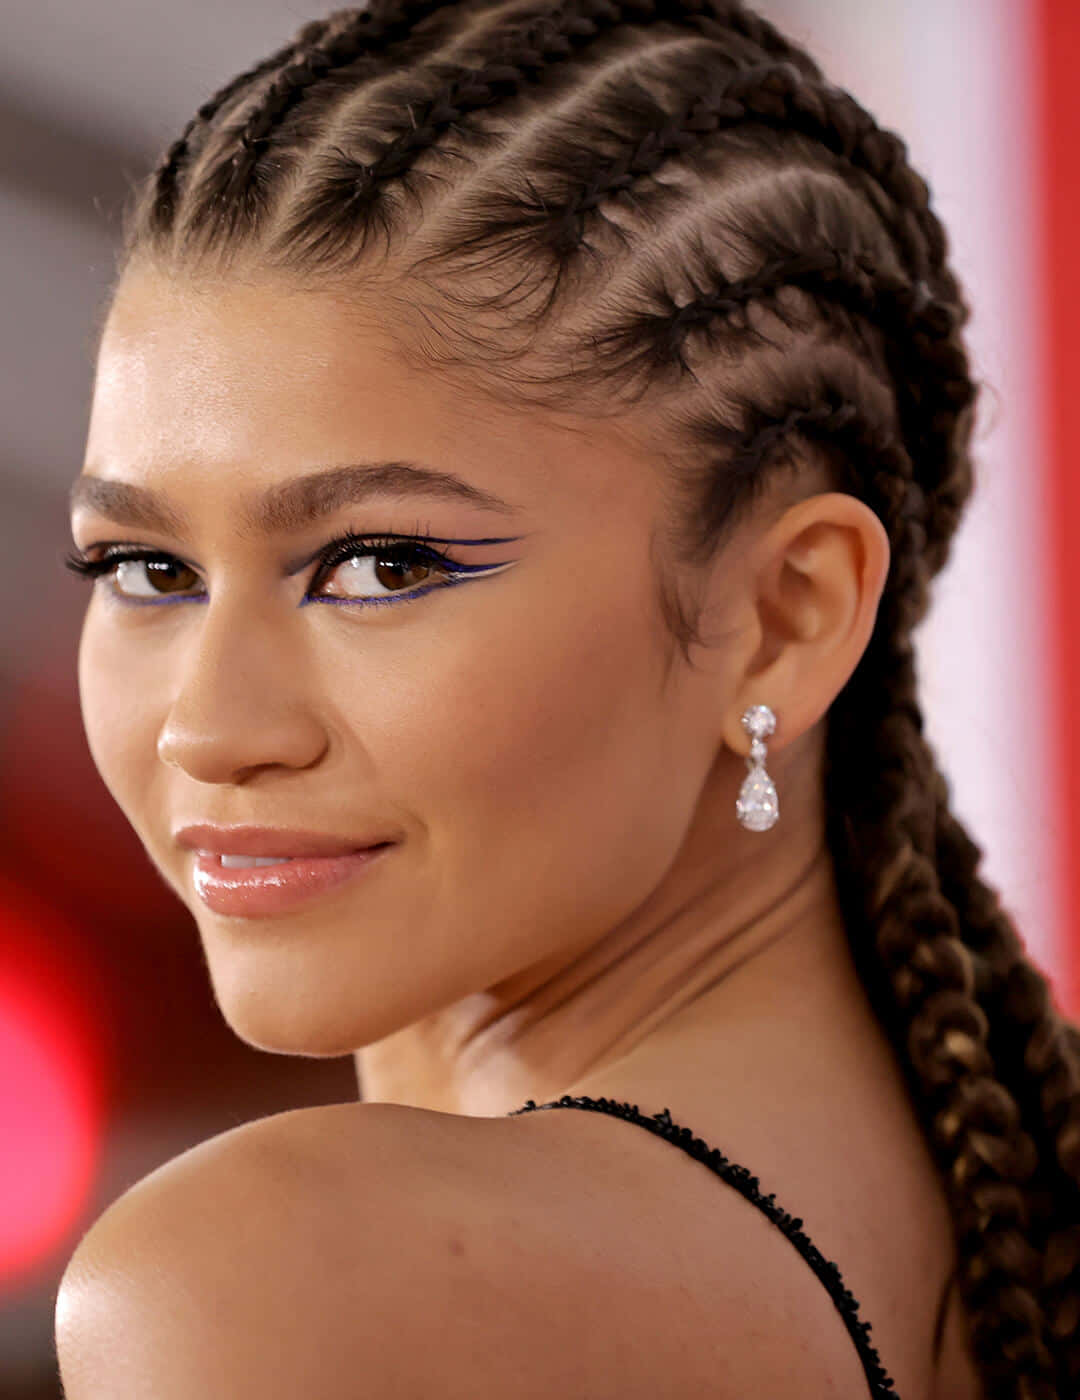 A Young Woman With Braids And Earrings